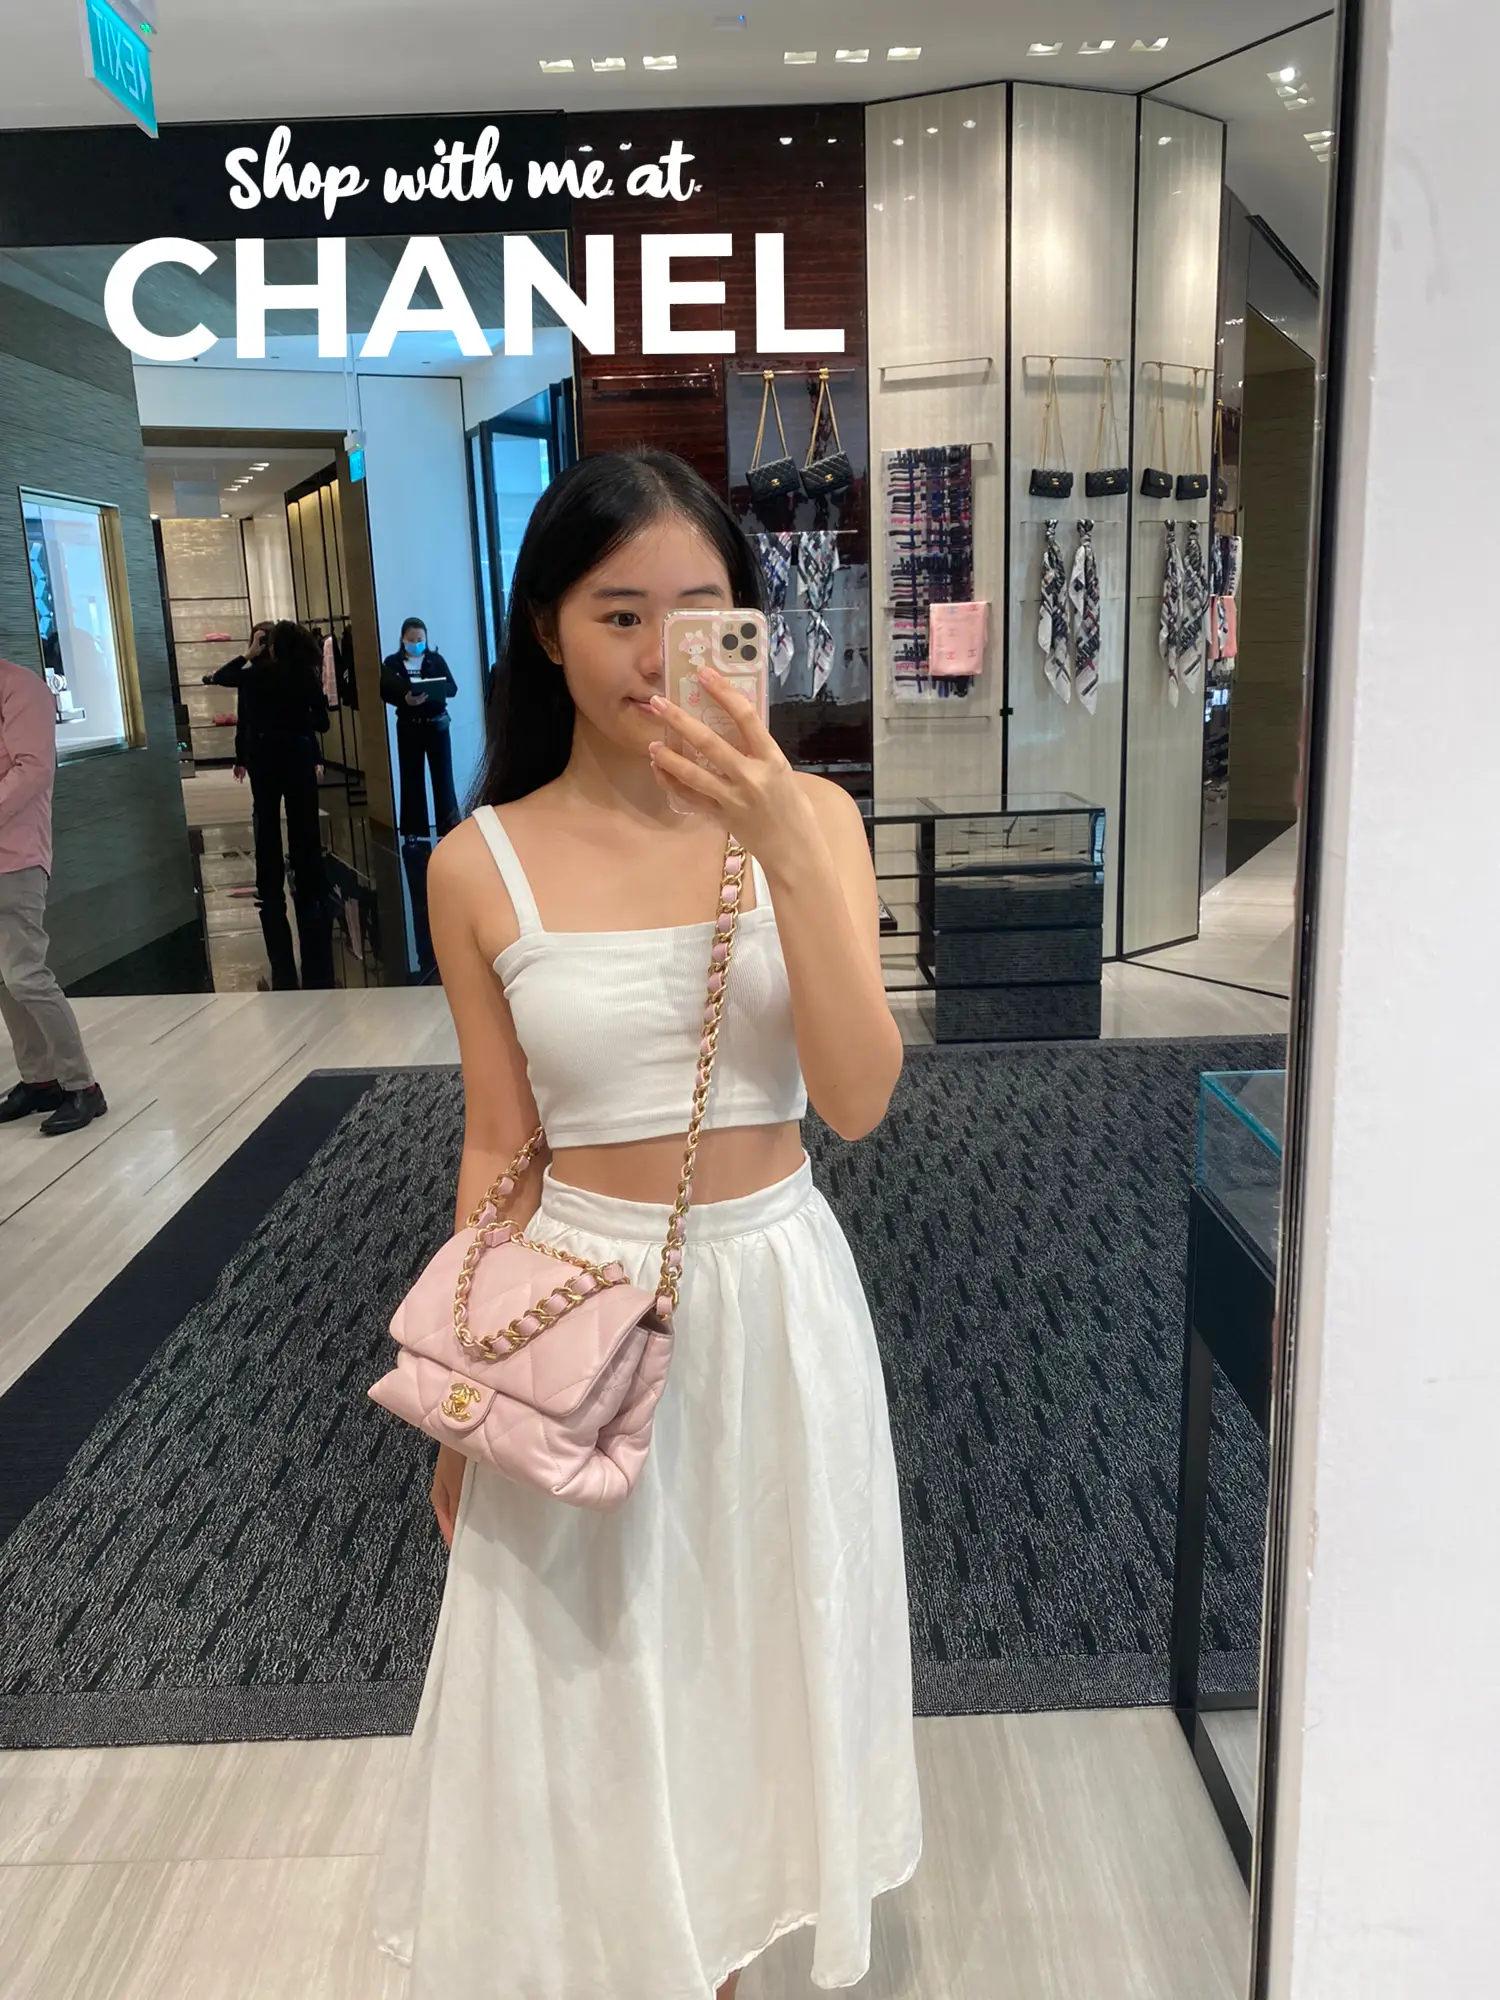 CHANEL BAG UNBOXING : I BOUGHT CHANEL MOST WANTED BAG from CHANEL FALL  WINTER Collection  KELLY? 